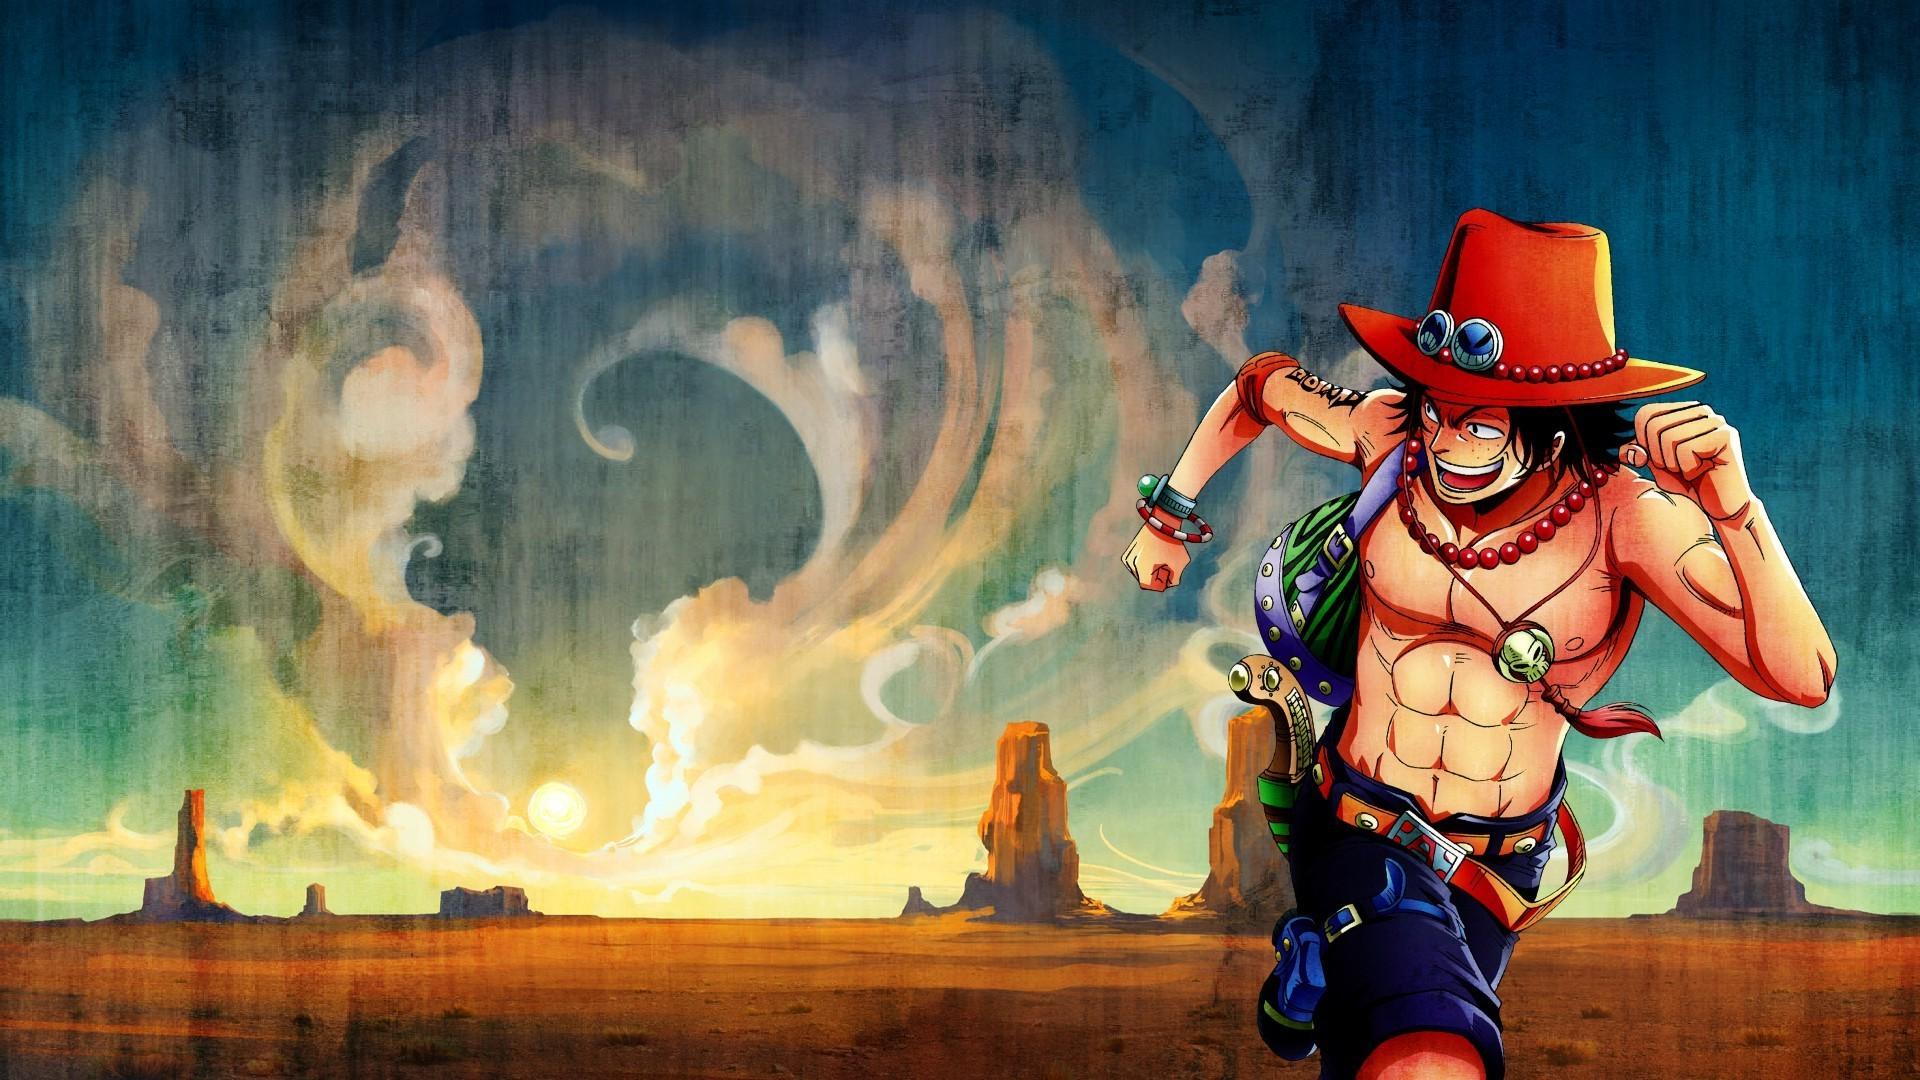 1920 x 1080 · jpeg - Portgas D. Ace, One Piece Wallpapers HD / Desktop and Mobile Backgrounds